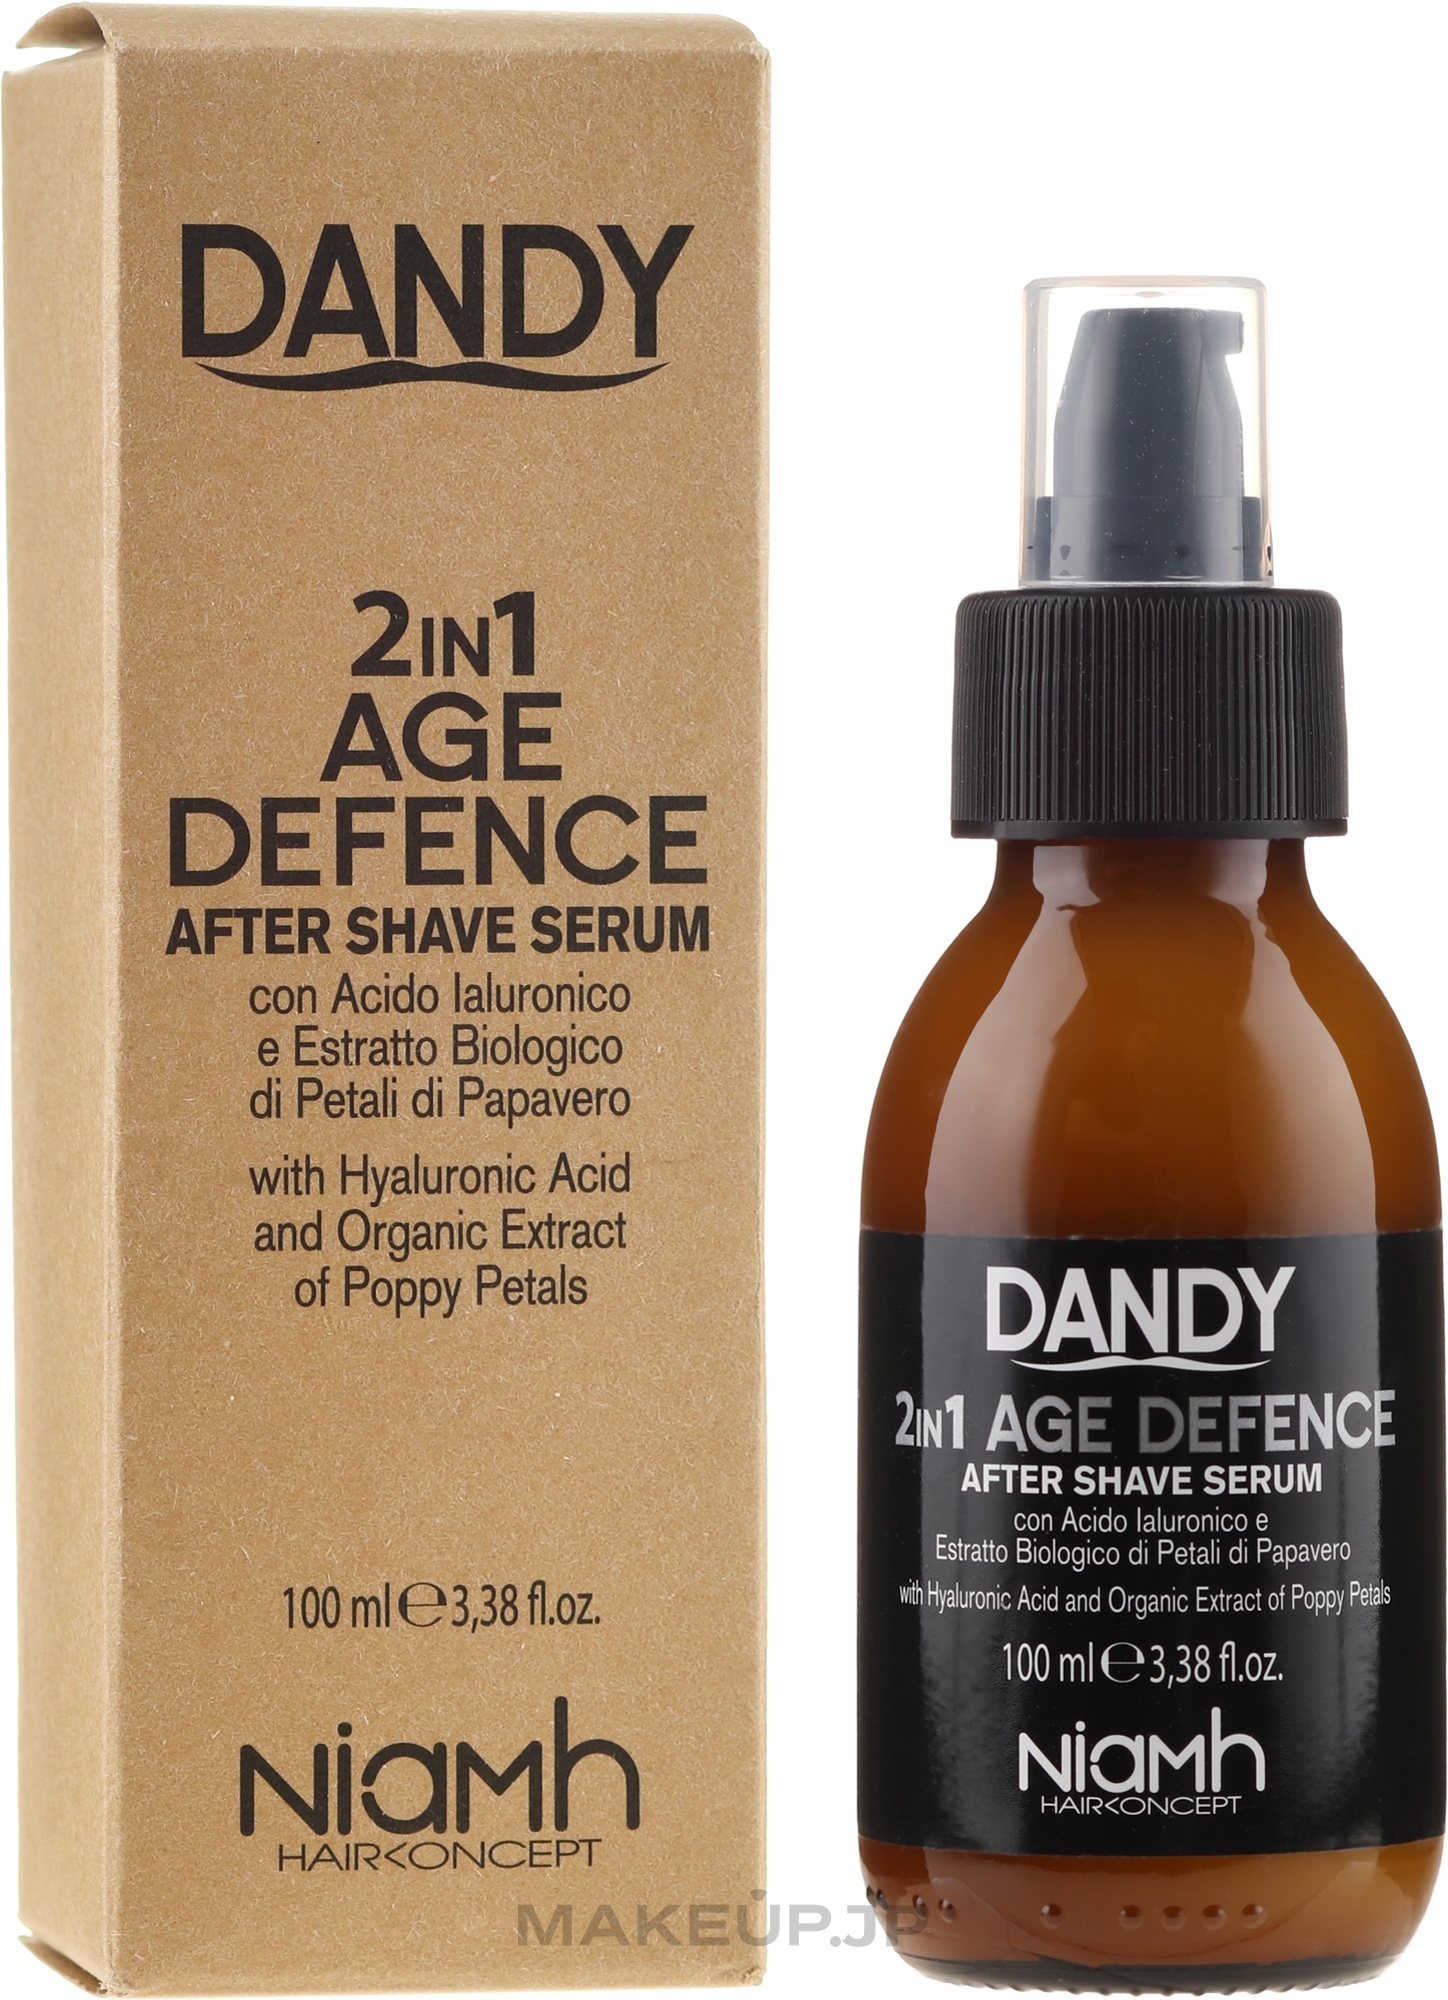 After Shave Serum - Niamh Hairconcept Dandy 2 in 1 Age Defence Aftershave Serum — photo 100 ml